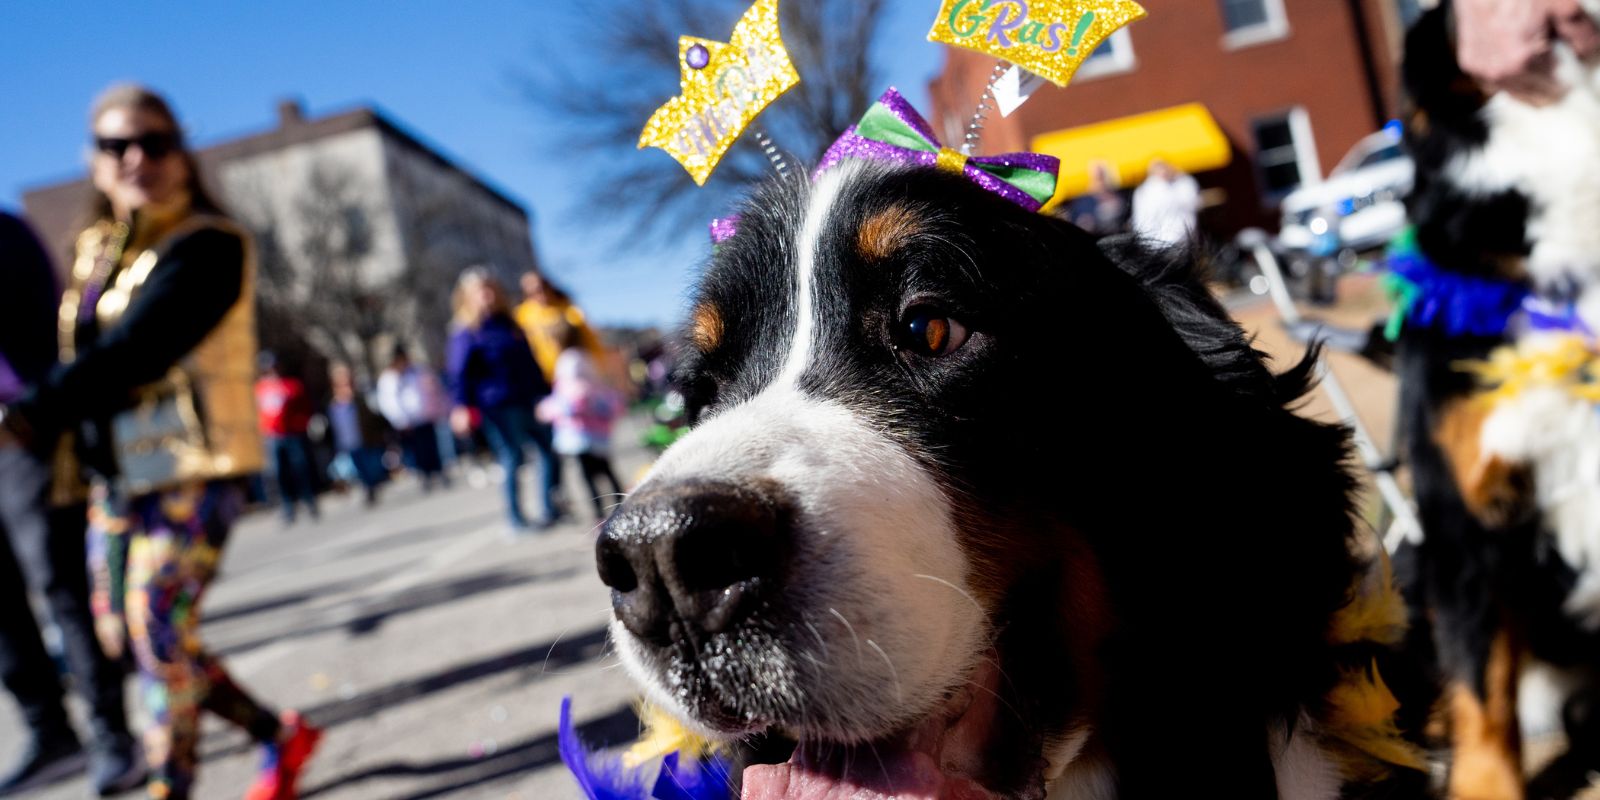 Soulard Mardi Gras festivities include the world’s largest parade of costumed pets.